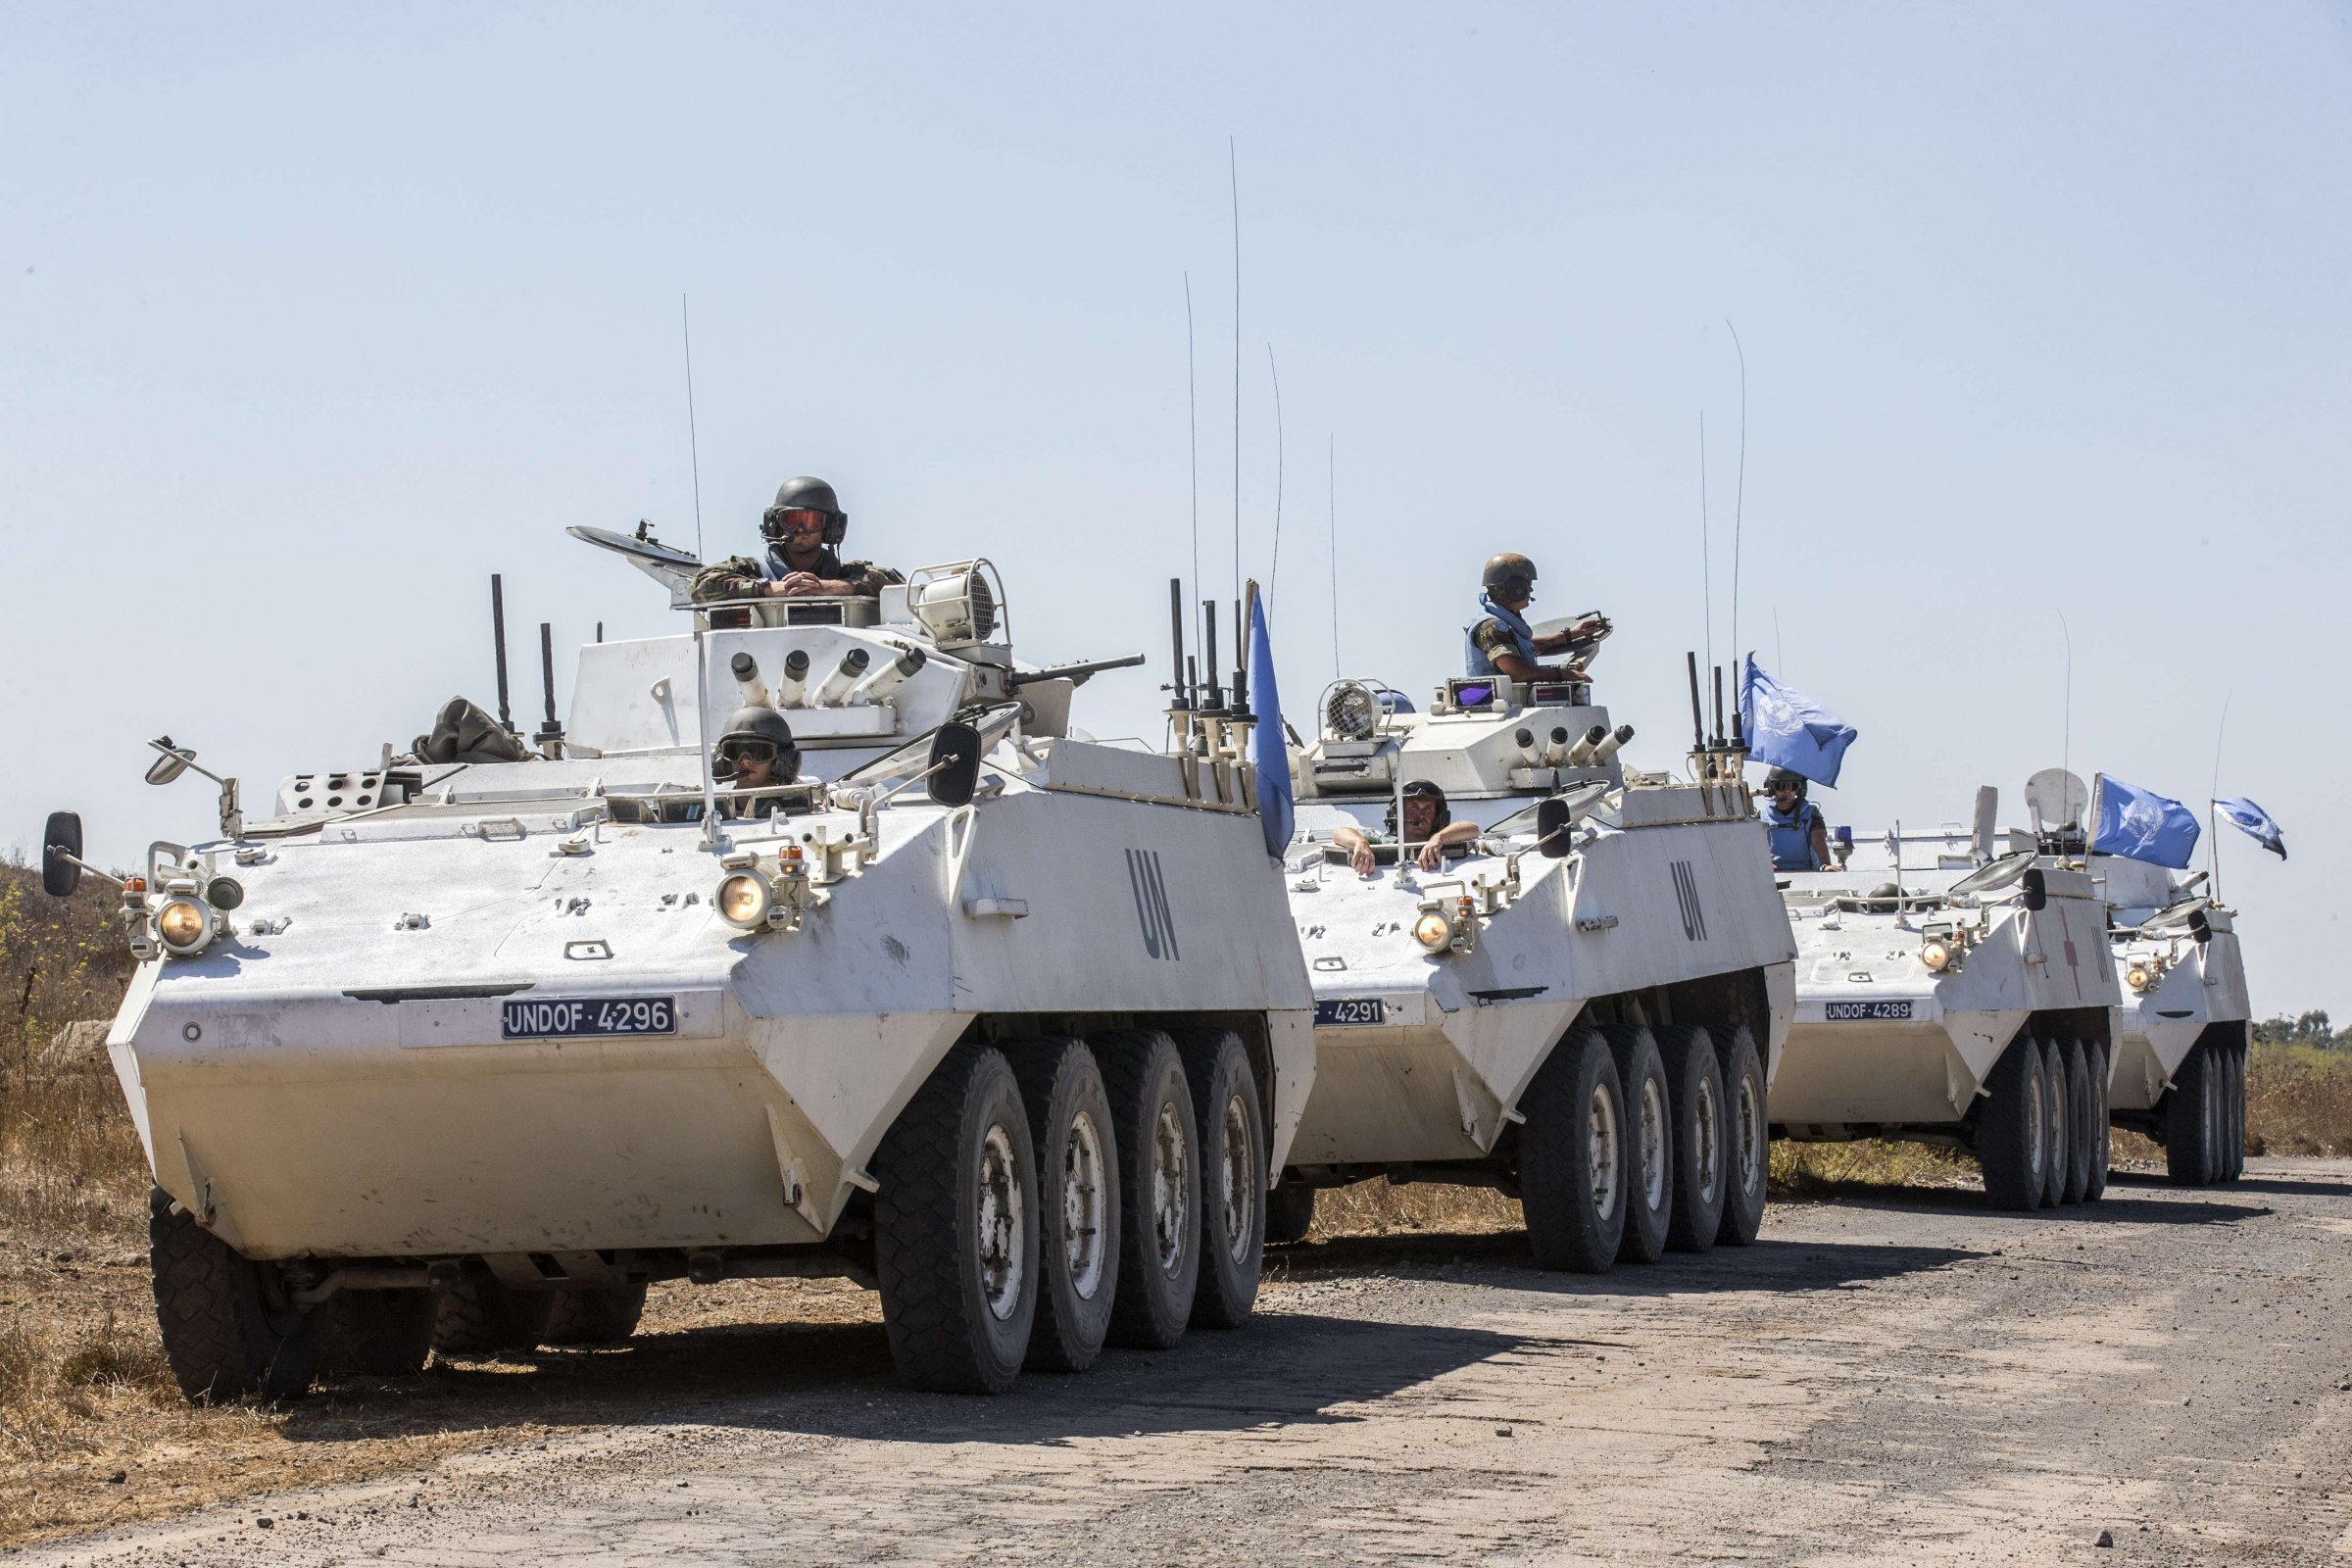 Irish members of the United Nations Disengagement Observer Force (UNDOF) sit on their armoured vehicles in the Israeli-annexed Golan Heights as they wait to cross into the Syrian-controlled territory, on August 28, 2014.